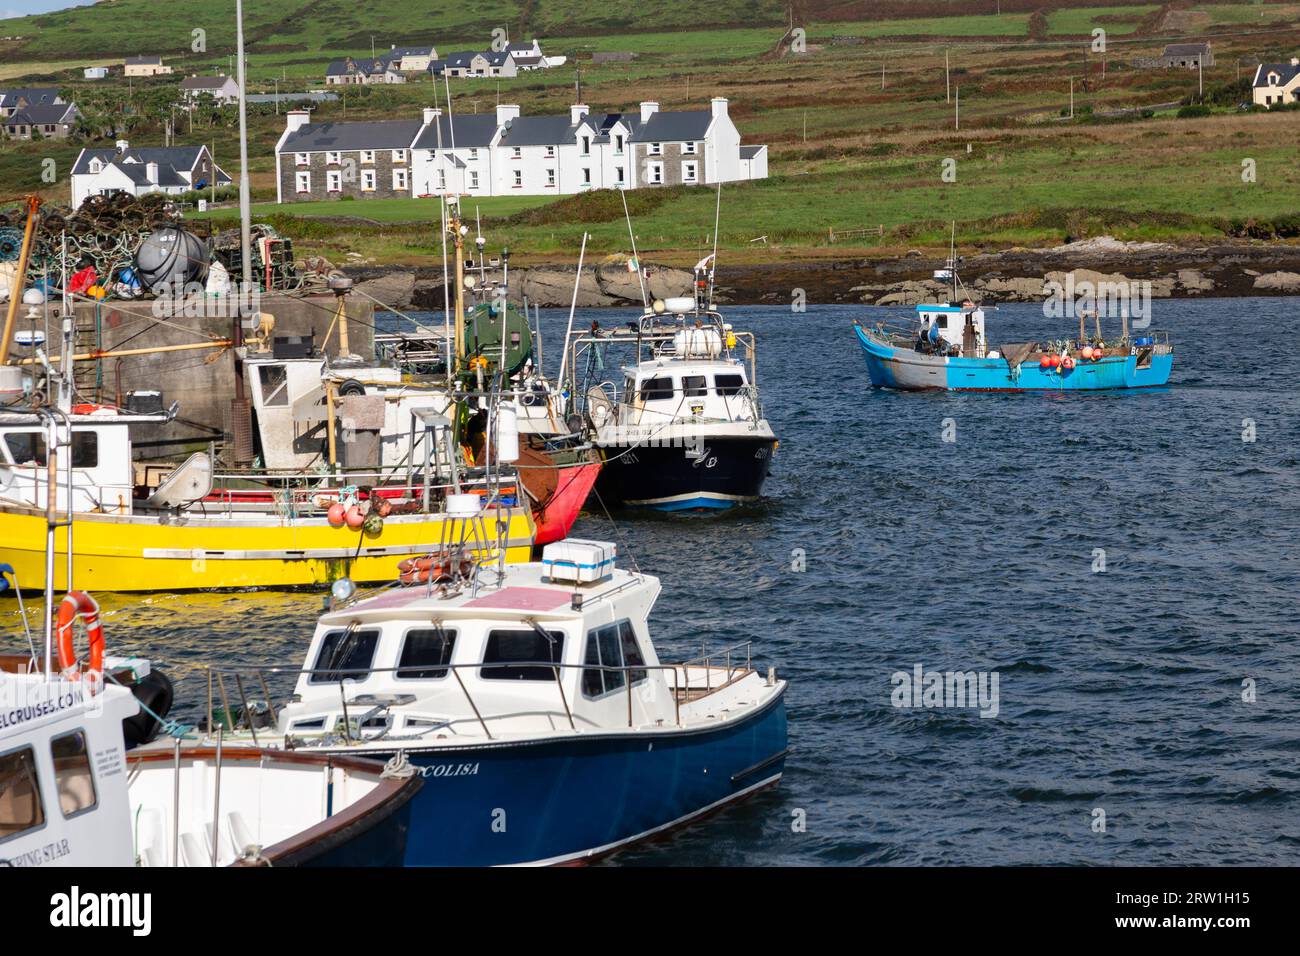 Skellig Michael Tourist boats moored at Portmagee, County Kerry, Ireland Stock Photo